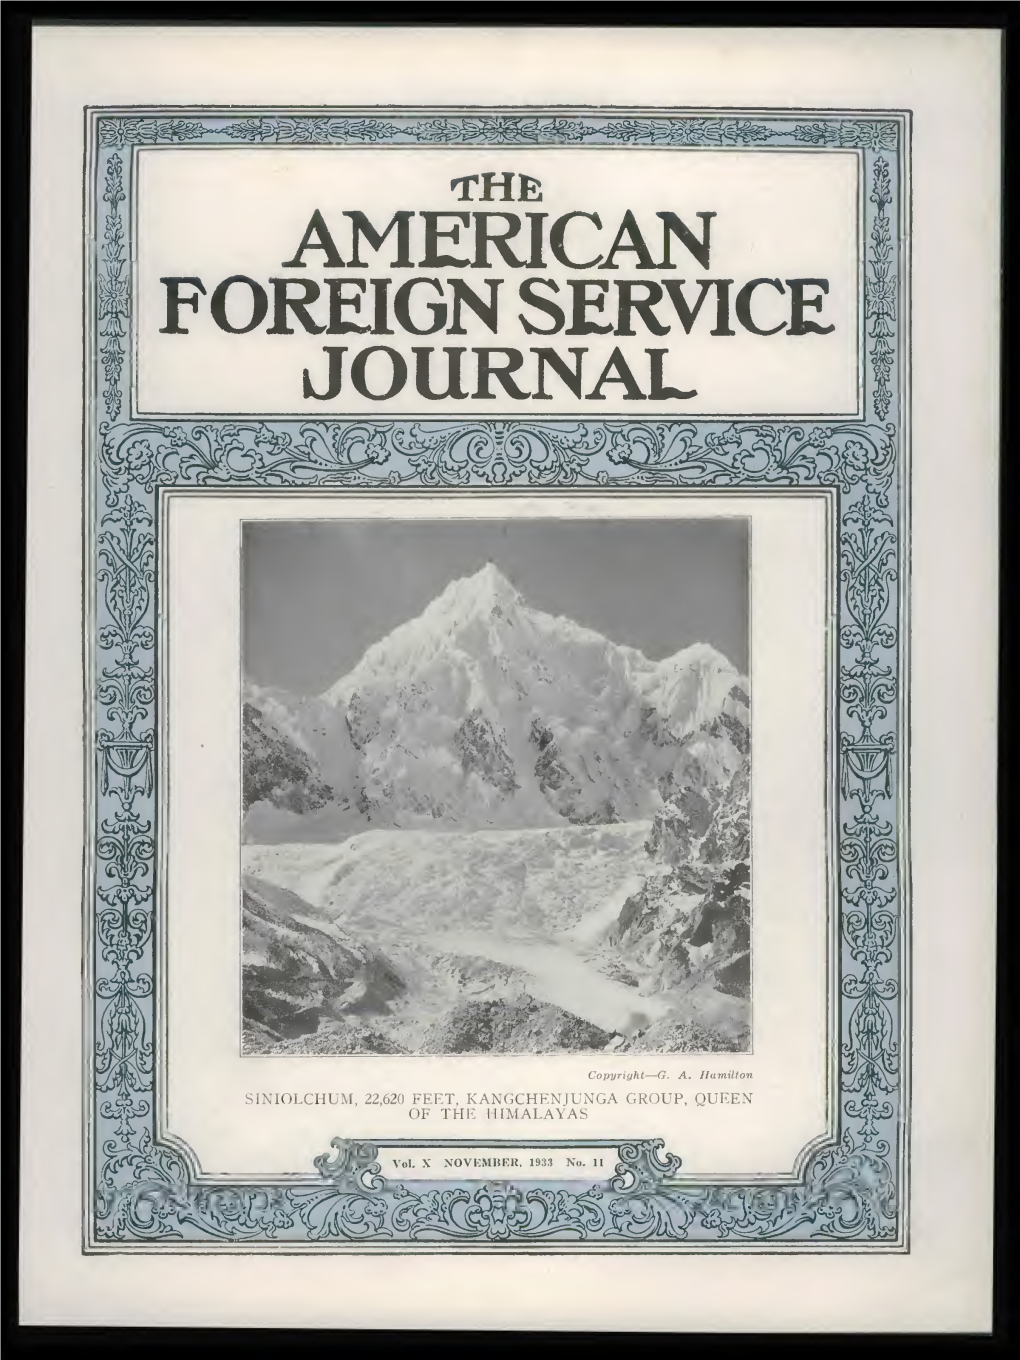 The Foreign Service Journal, November 1933